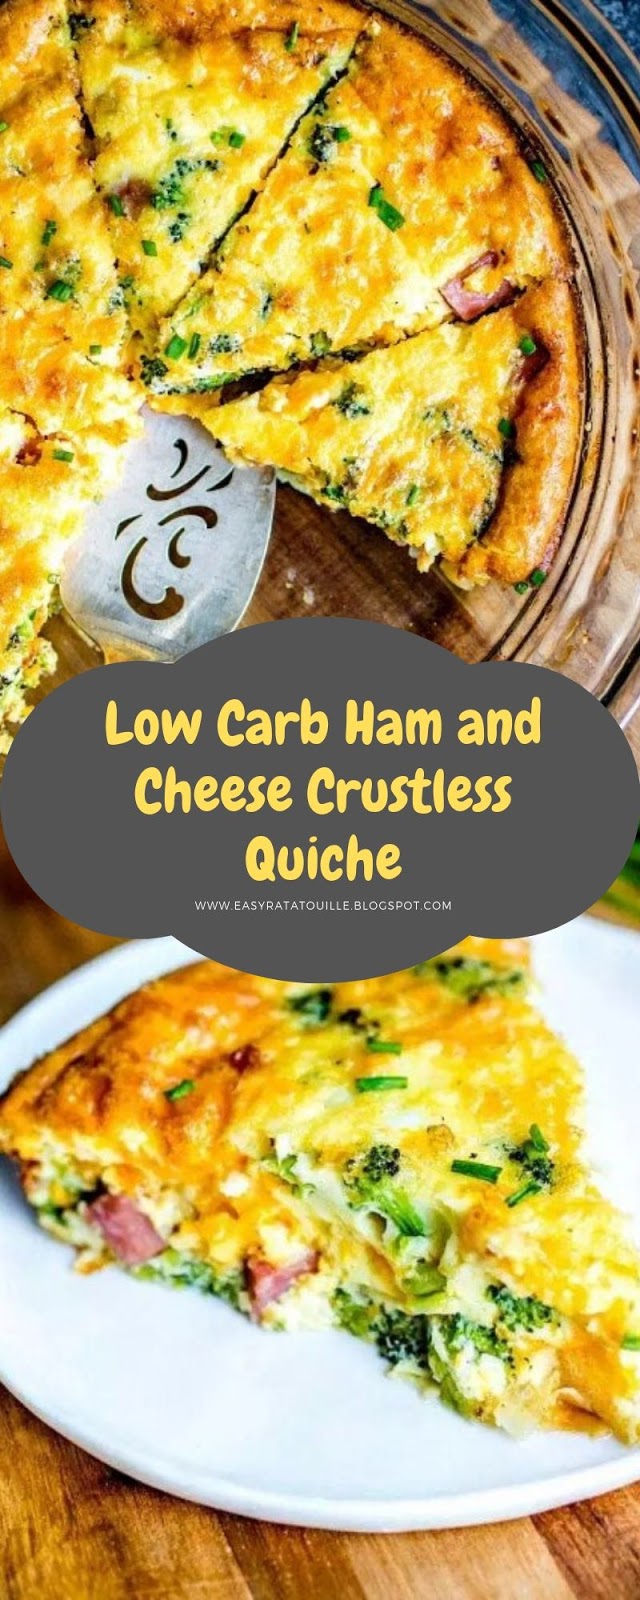 Low Carb Ham and Cheese Crustless Quiche